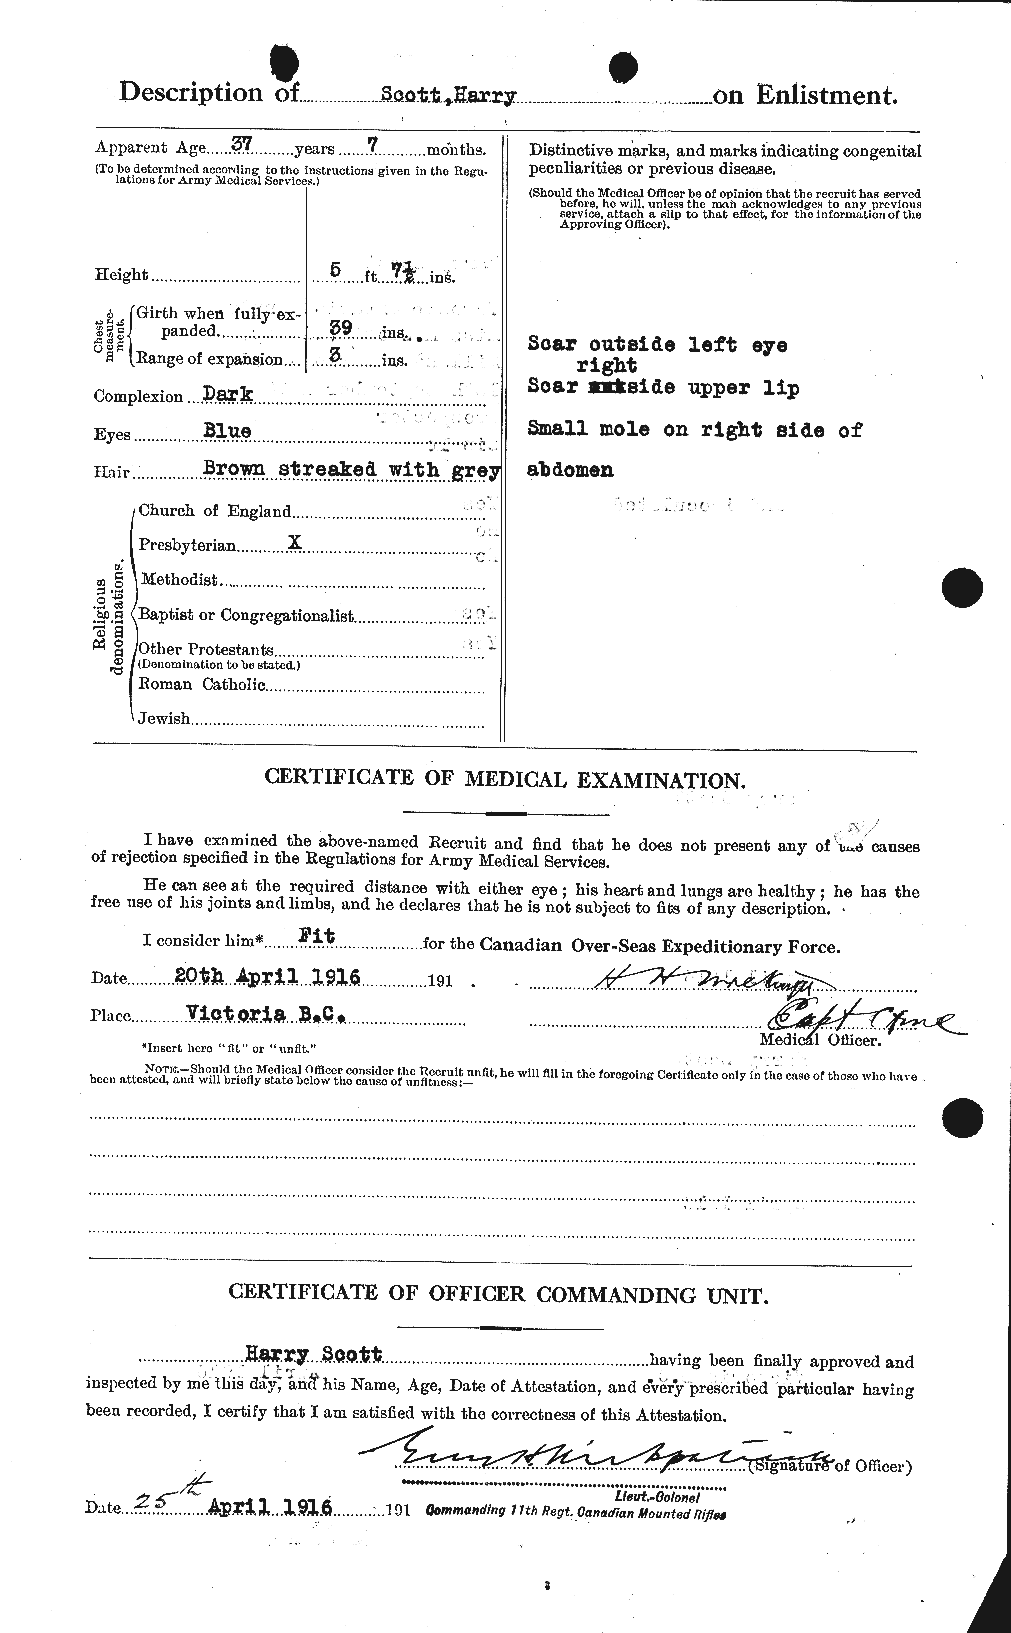 Personnel Records of the First World War - CEF 086322b